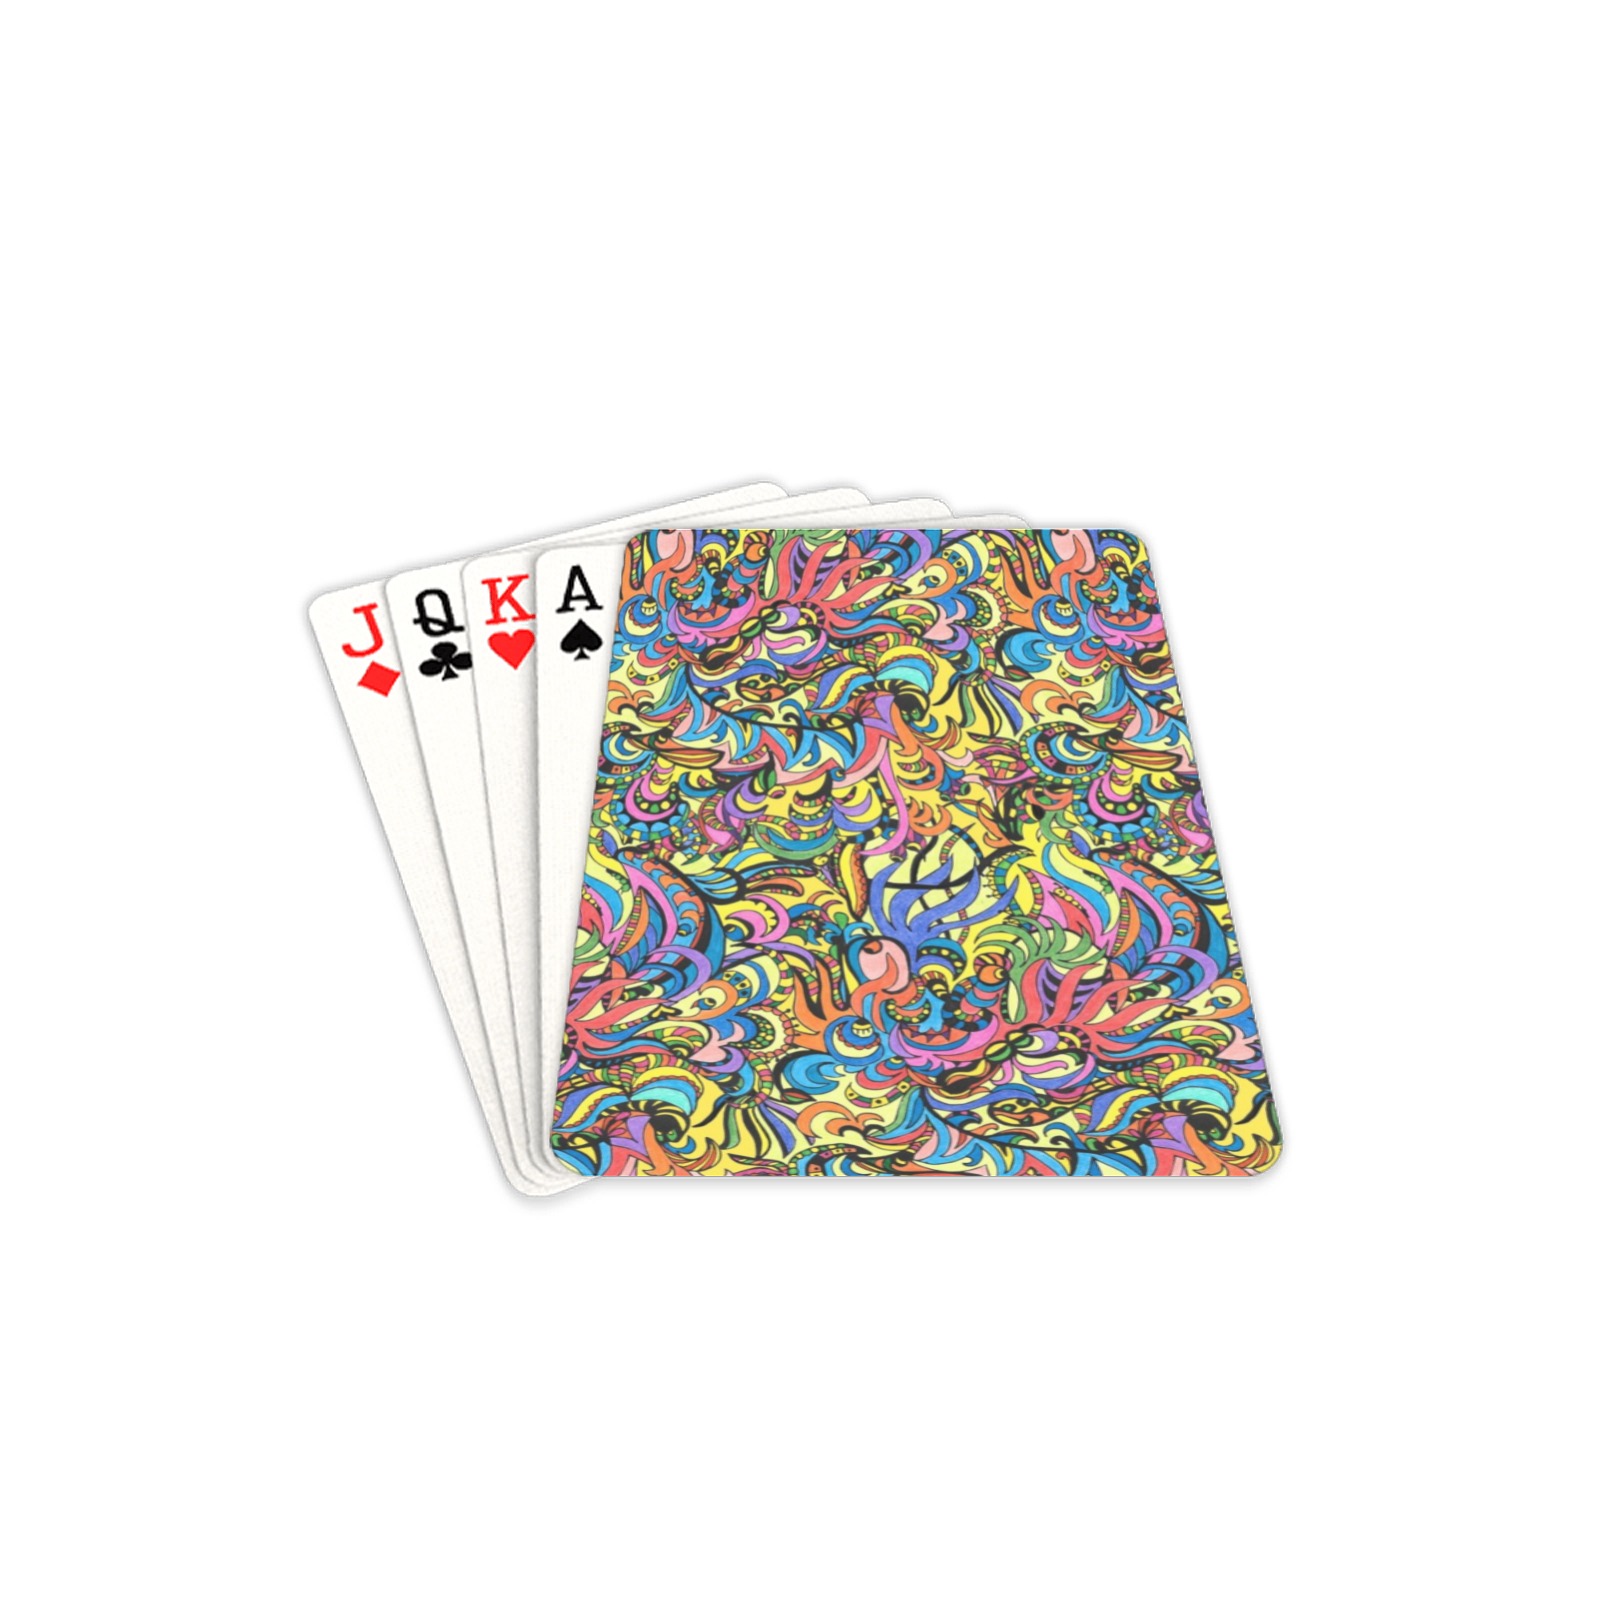 Mariana Trench Playing Cards 2.5"x3.5"